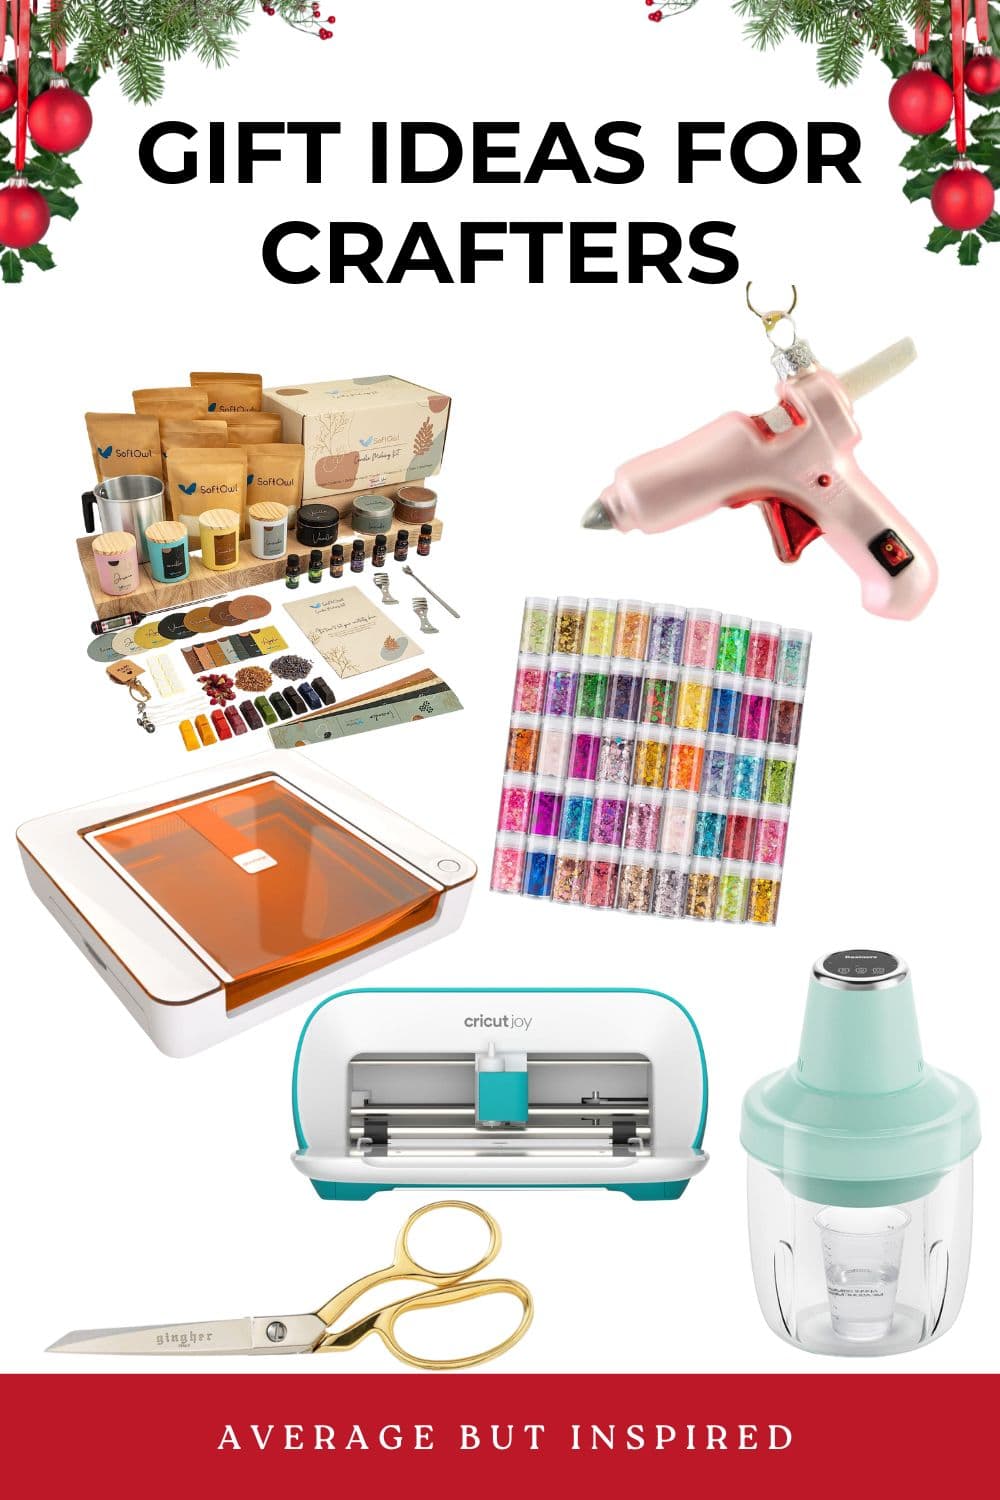 Need a holiday gift idea for your favorite crafter? Look no further! Here you'll find lots of gift ideas for crafters and makers!